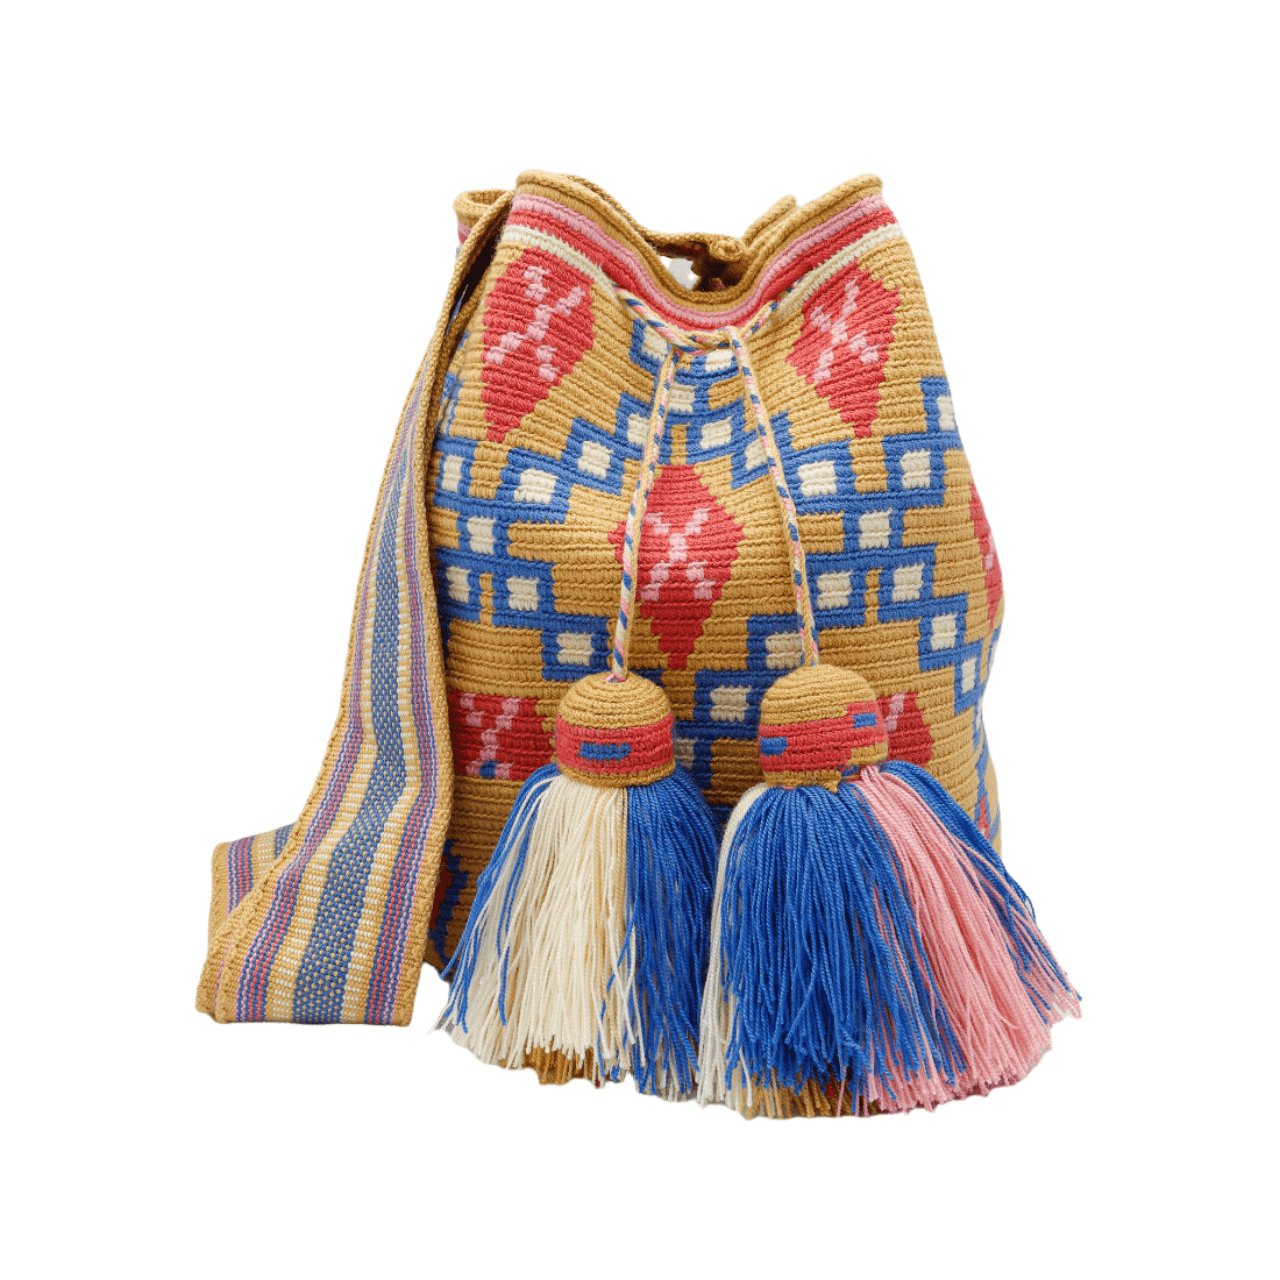 Mari Wayuu Bag: Vanilla, blues, and pinks in a handcrafted crochet beauty for everyday chic